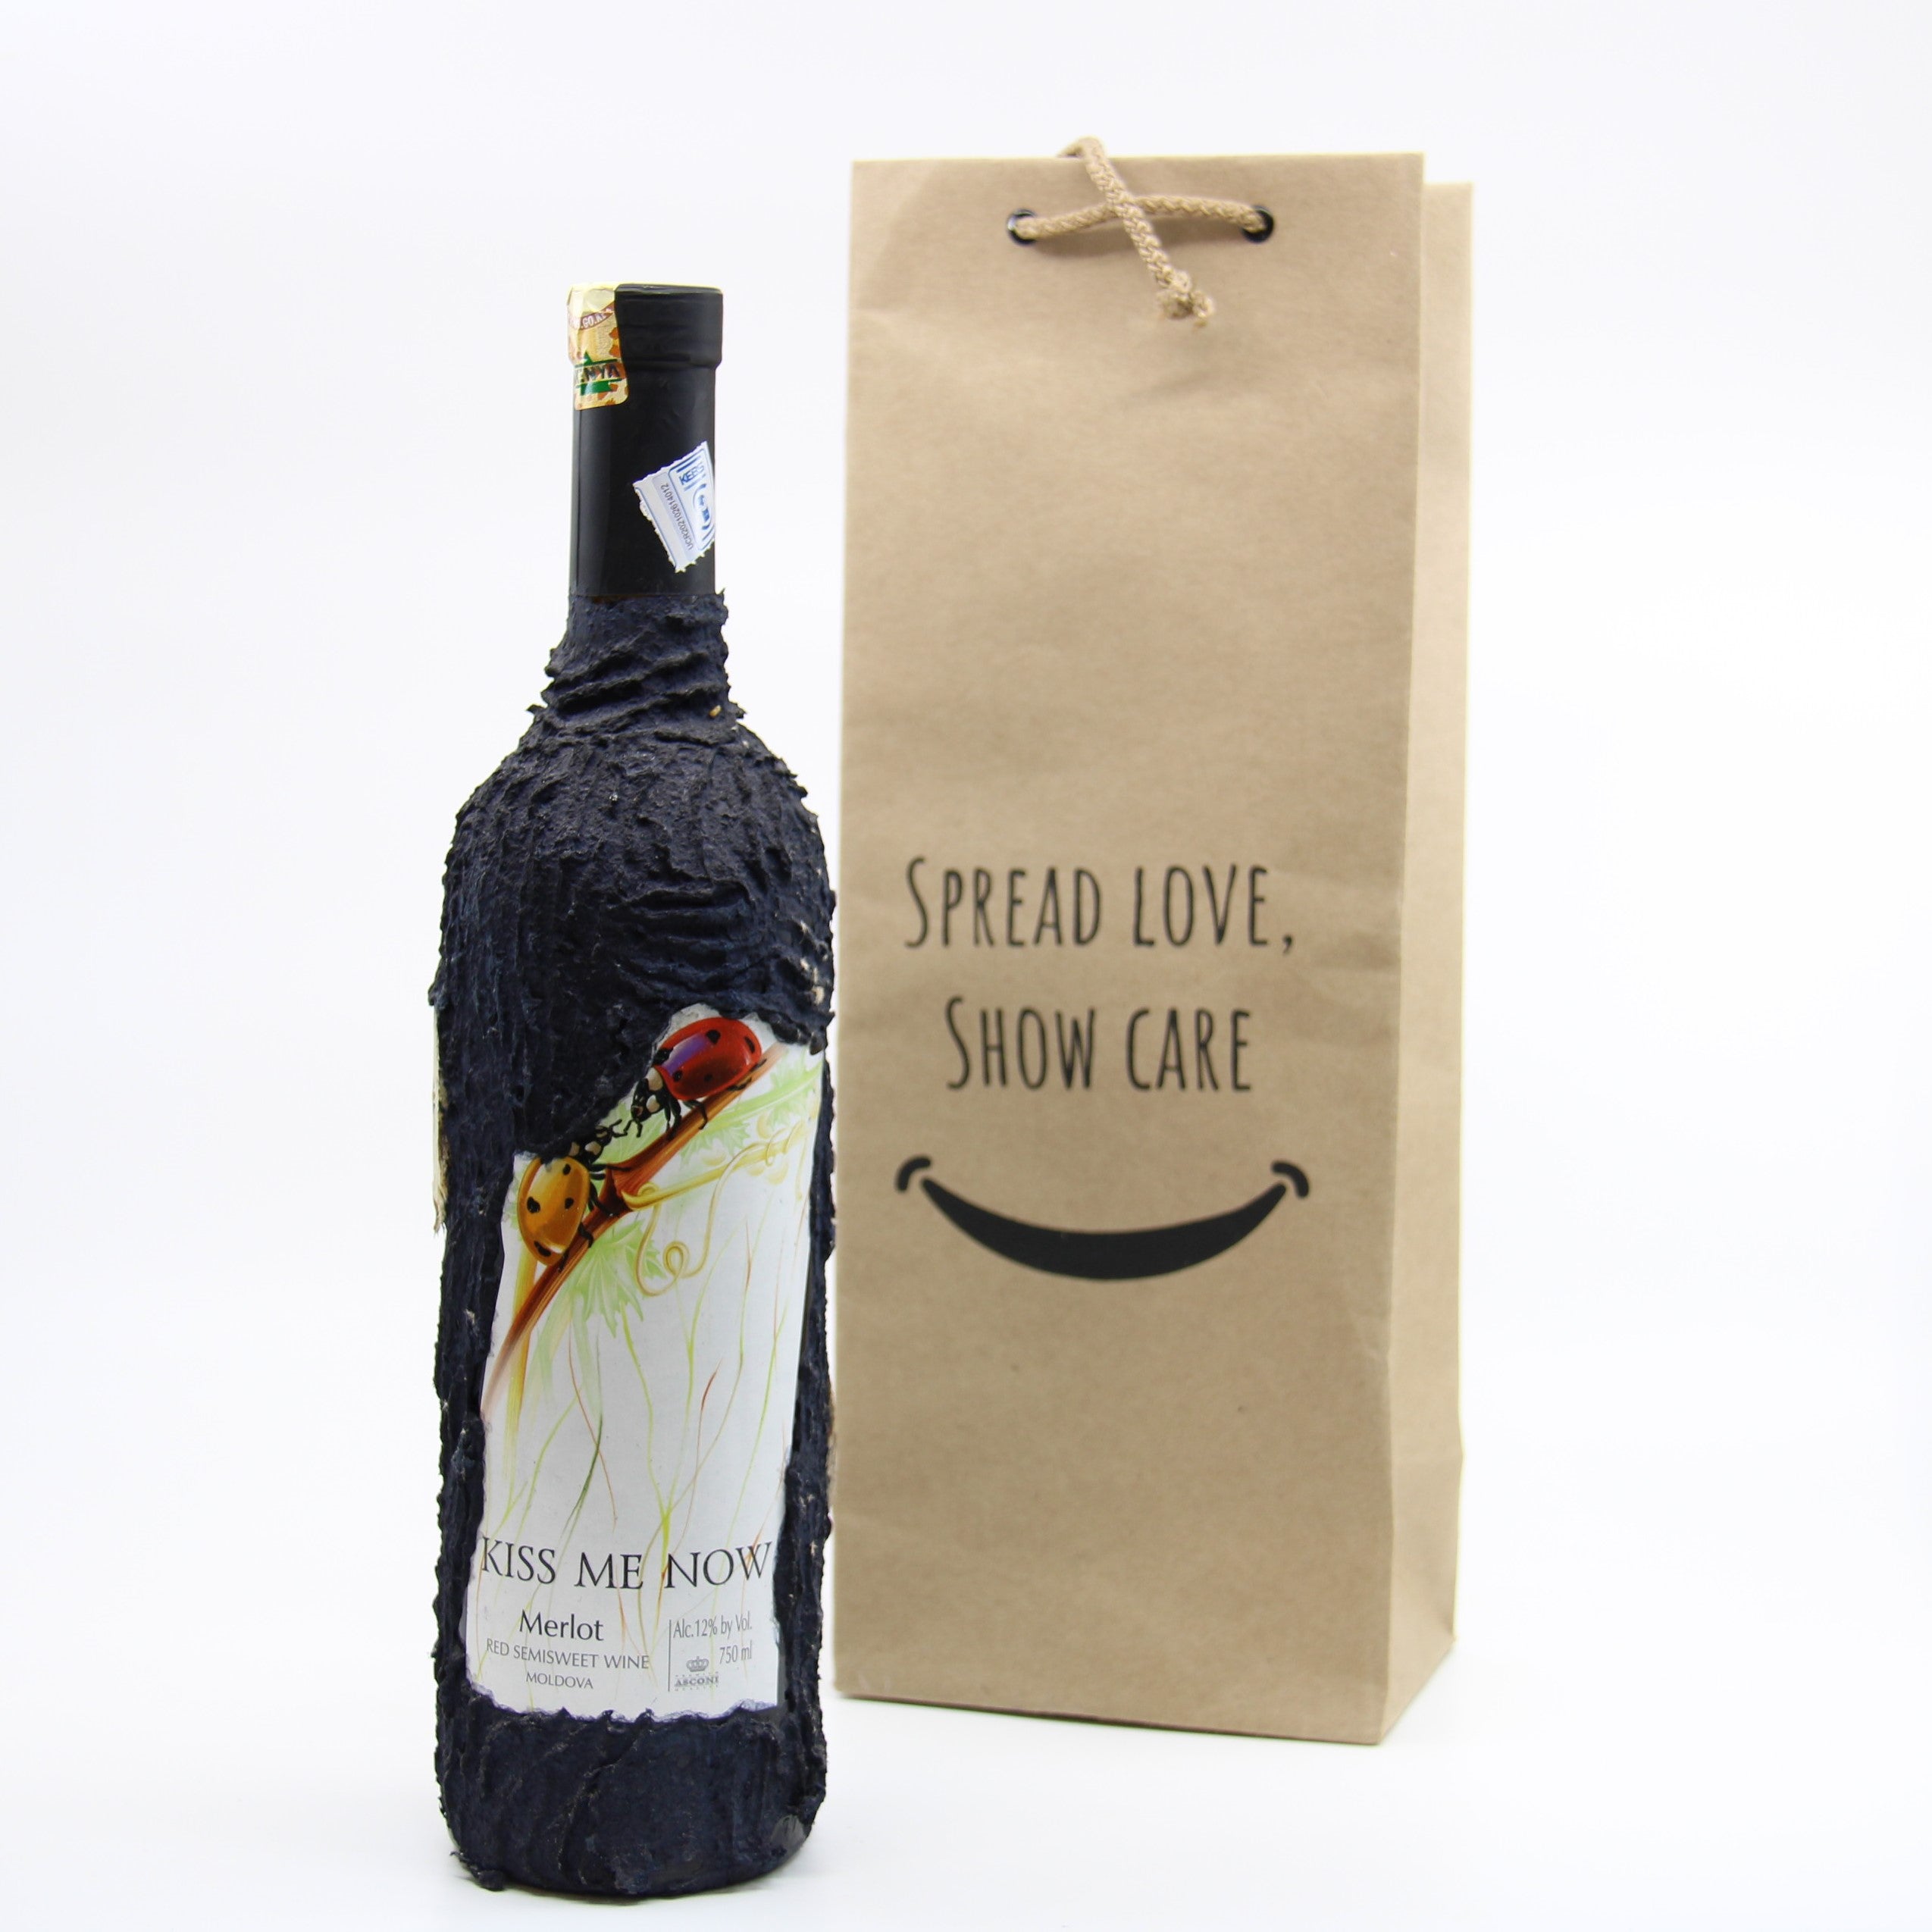 Simona Flowers - Be ready to enjoy both the outside and inside of this well-made bottle of Asconi wine.